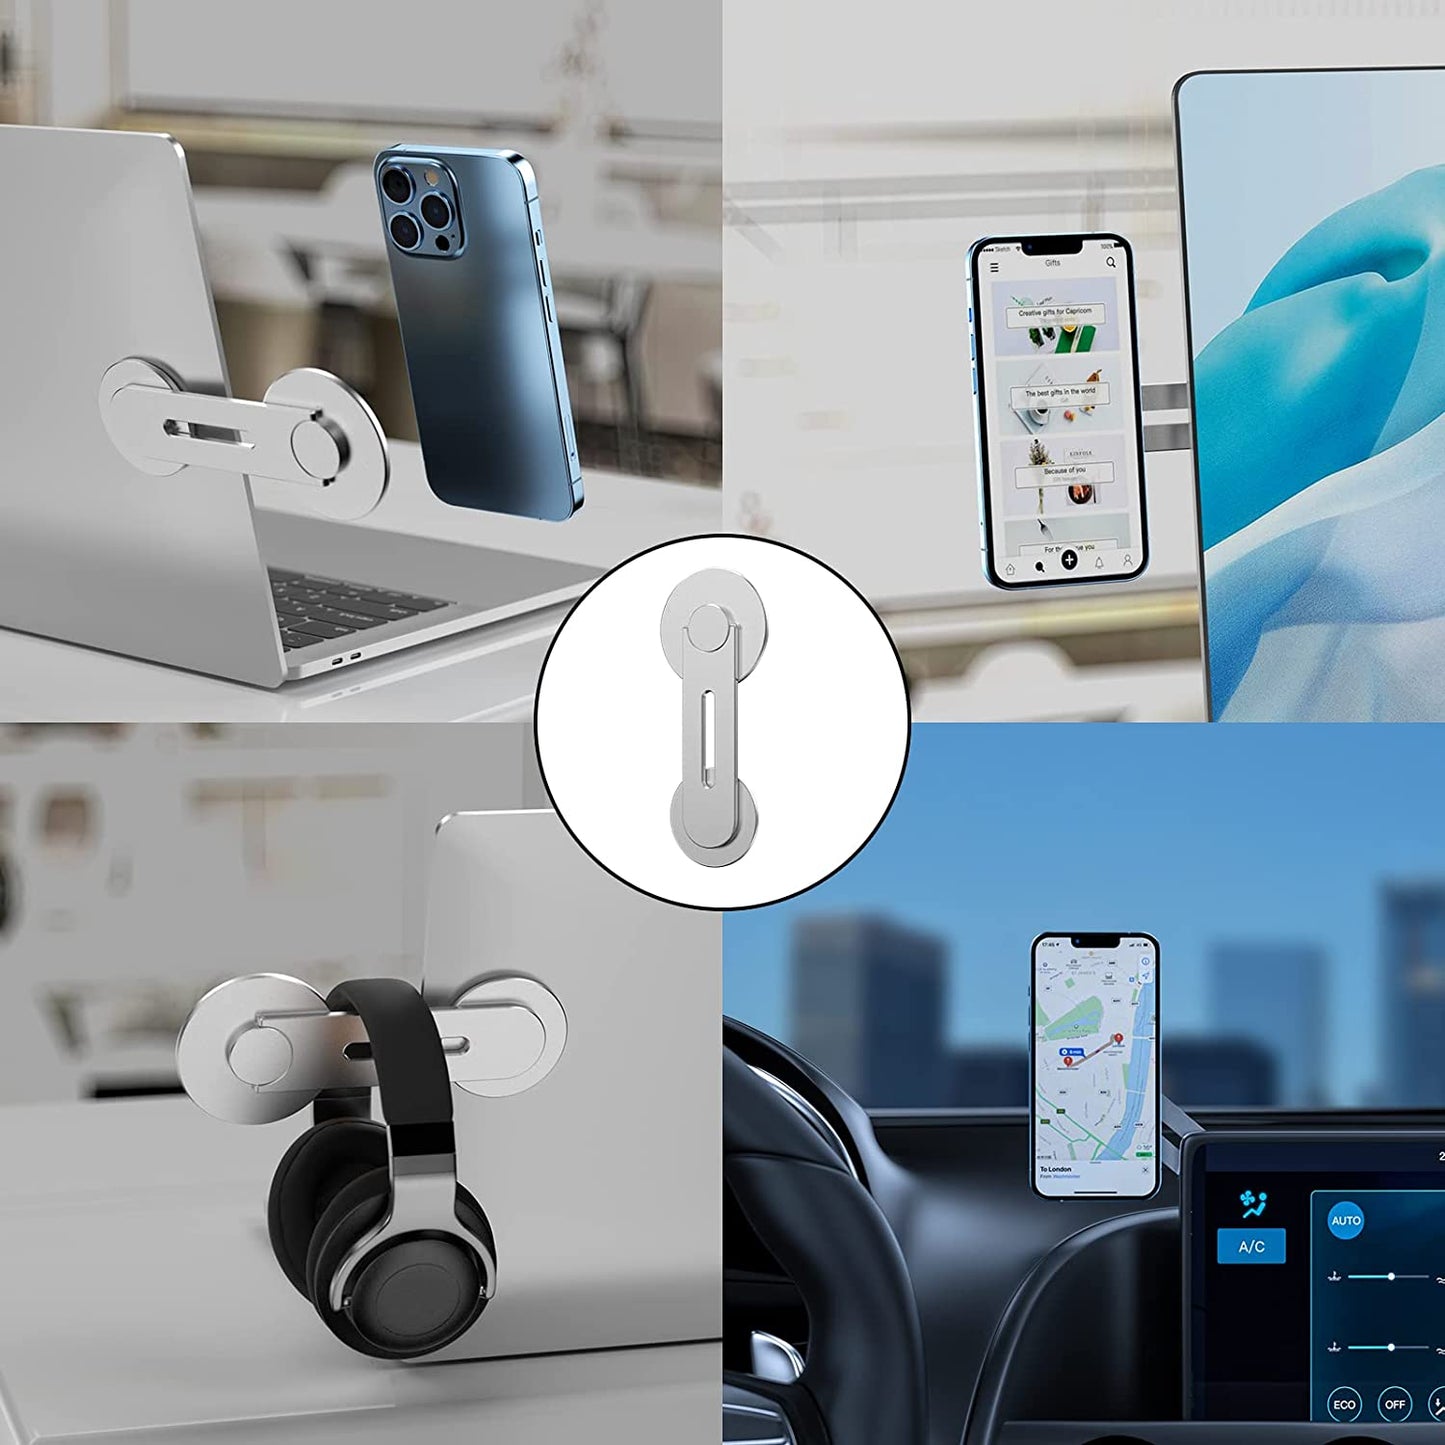 If you're looking for a phone mount thats strong and clears your workspace...its finally here. The LapMount Ultra.